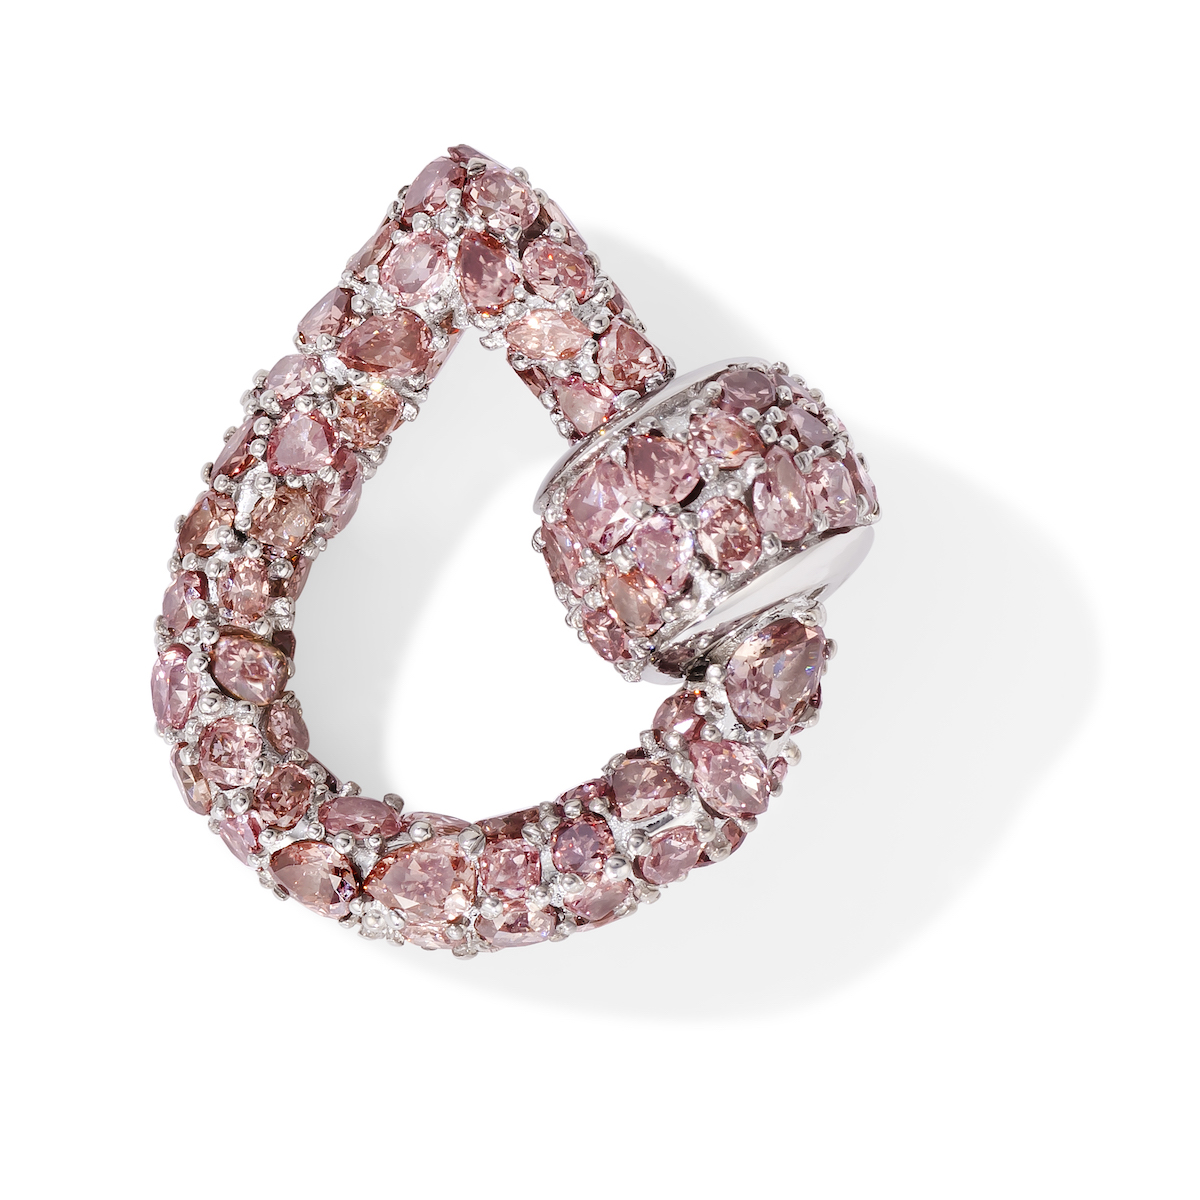 Marla Aaron Reveals New Piece With Natural Pink Diamonds